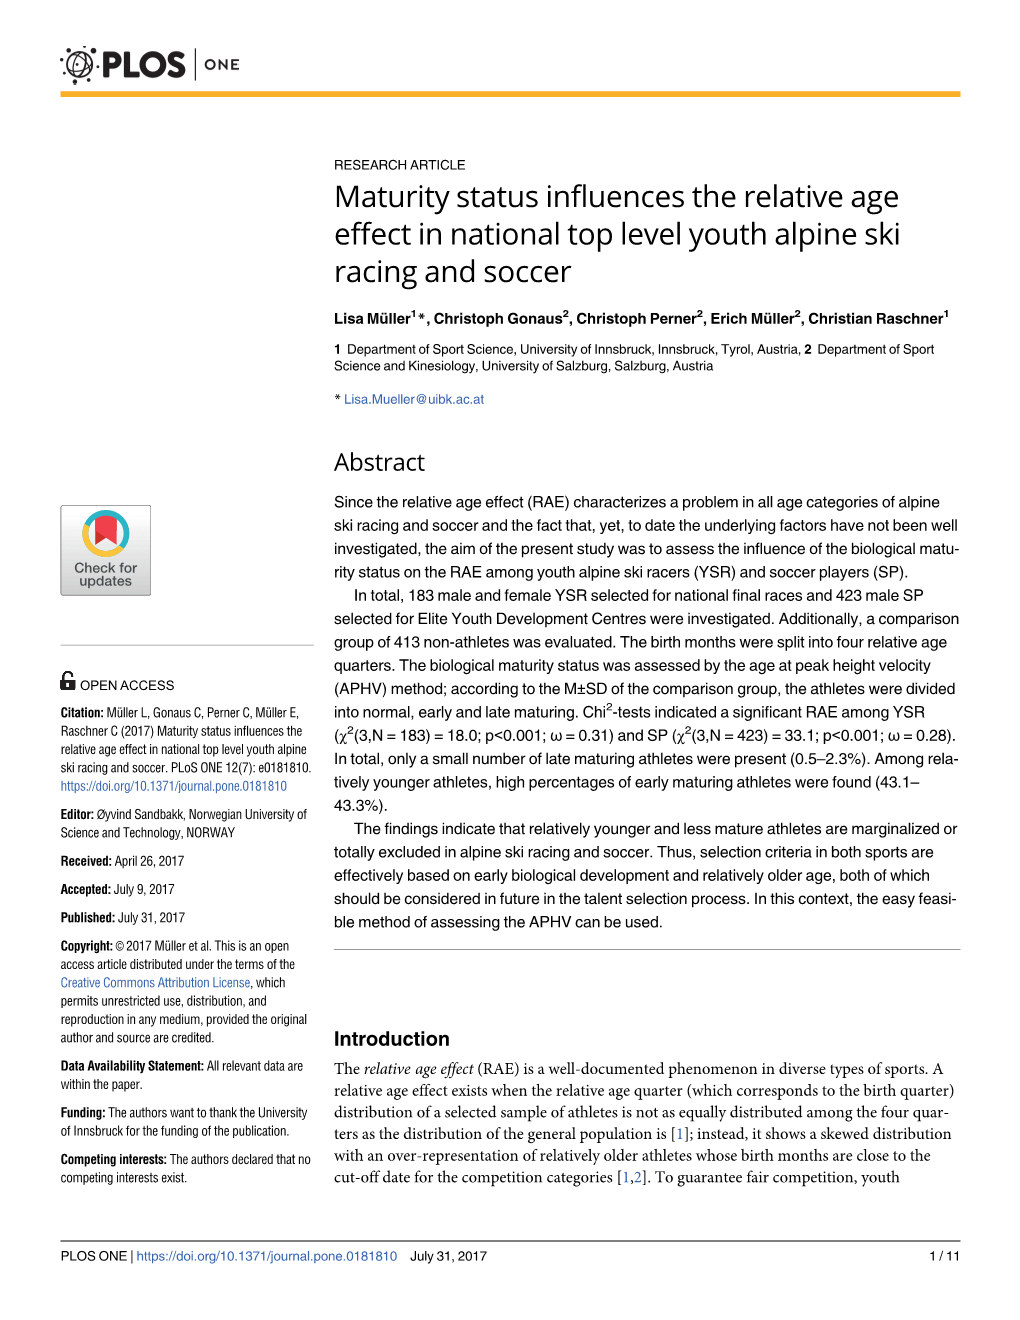 Maturity Status Influences the Relative Age Effect in National Top Level Youth Alpine Ski Racing and Soccer